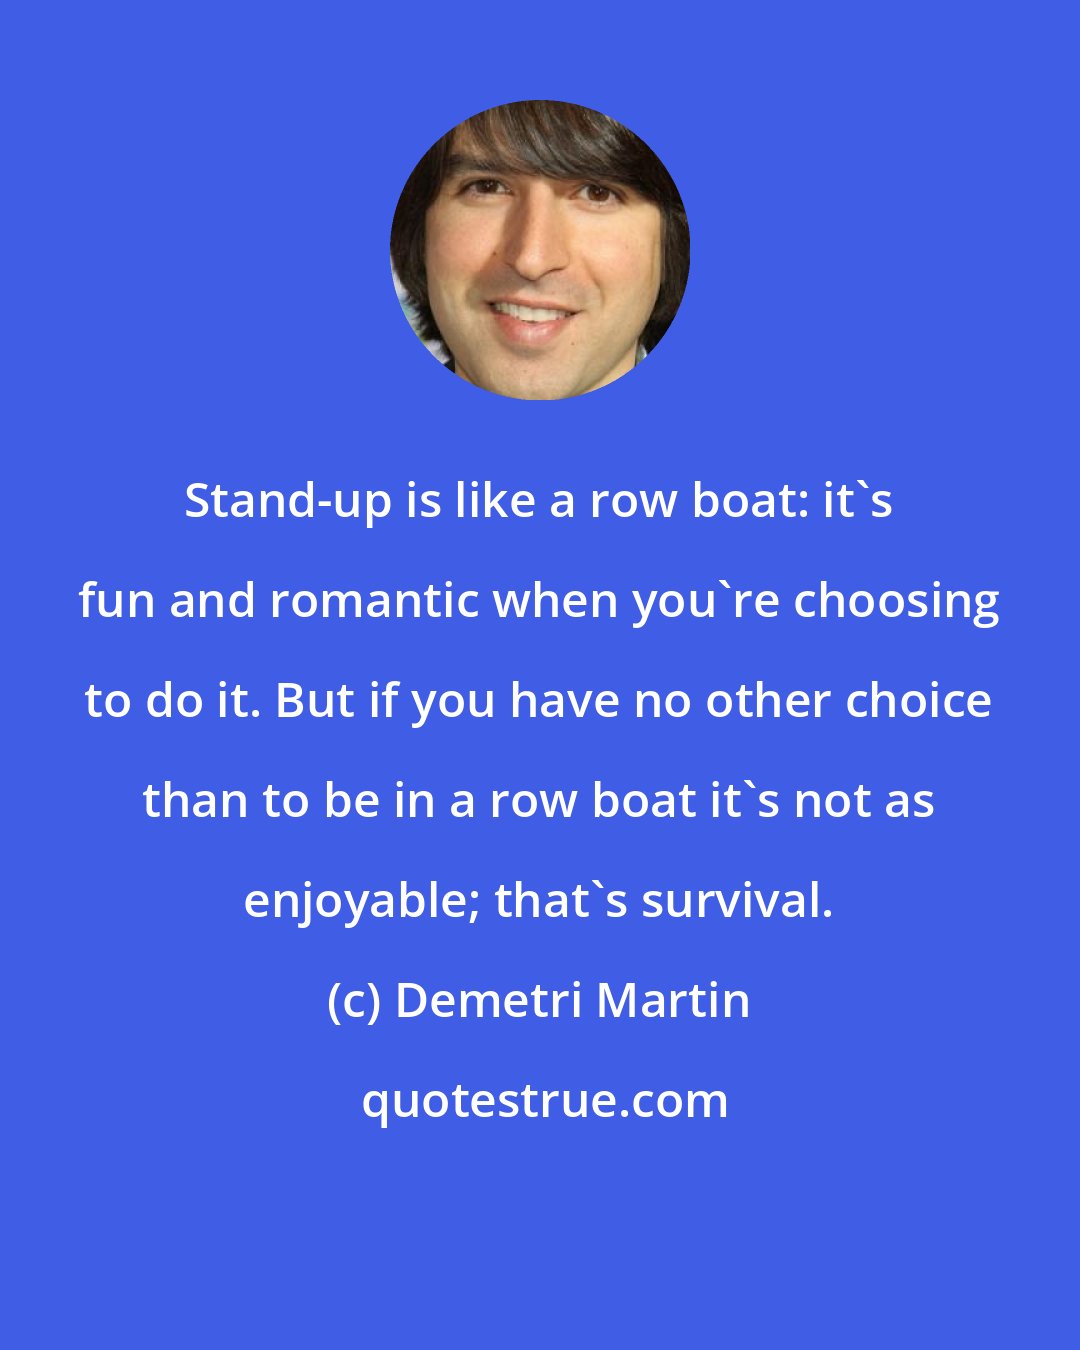 Demetri Martin: Stand-up is like a row boat: it's fun and romantic when you're choosing to do it. But if you have no other choice than to be in a row boat it's not as enjoyable; that's survival.